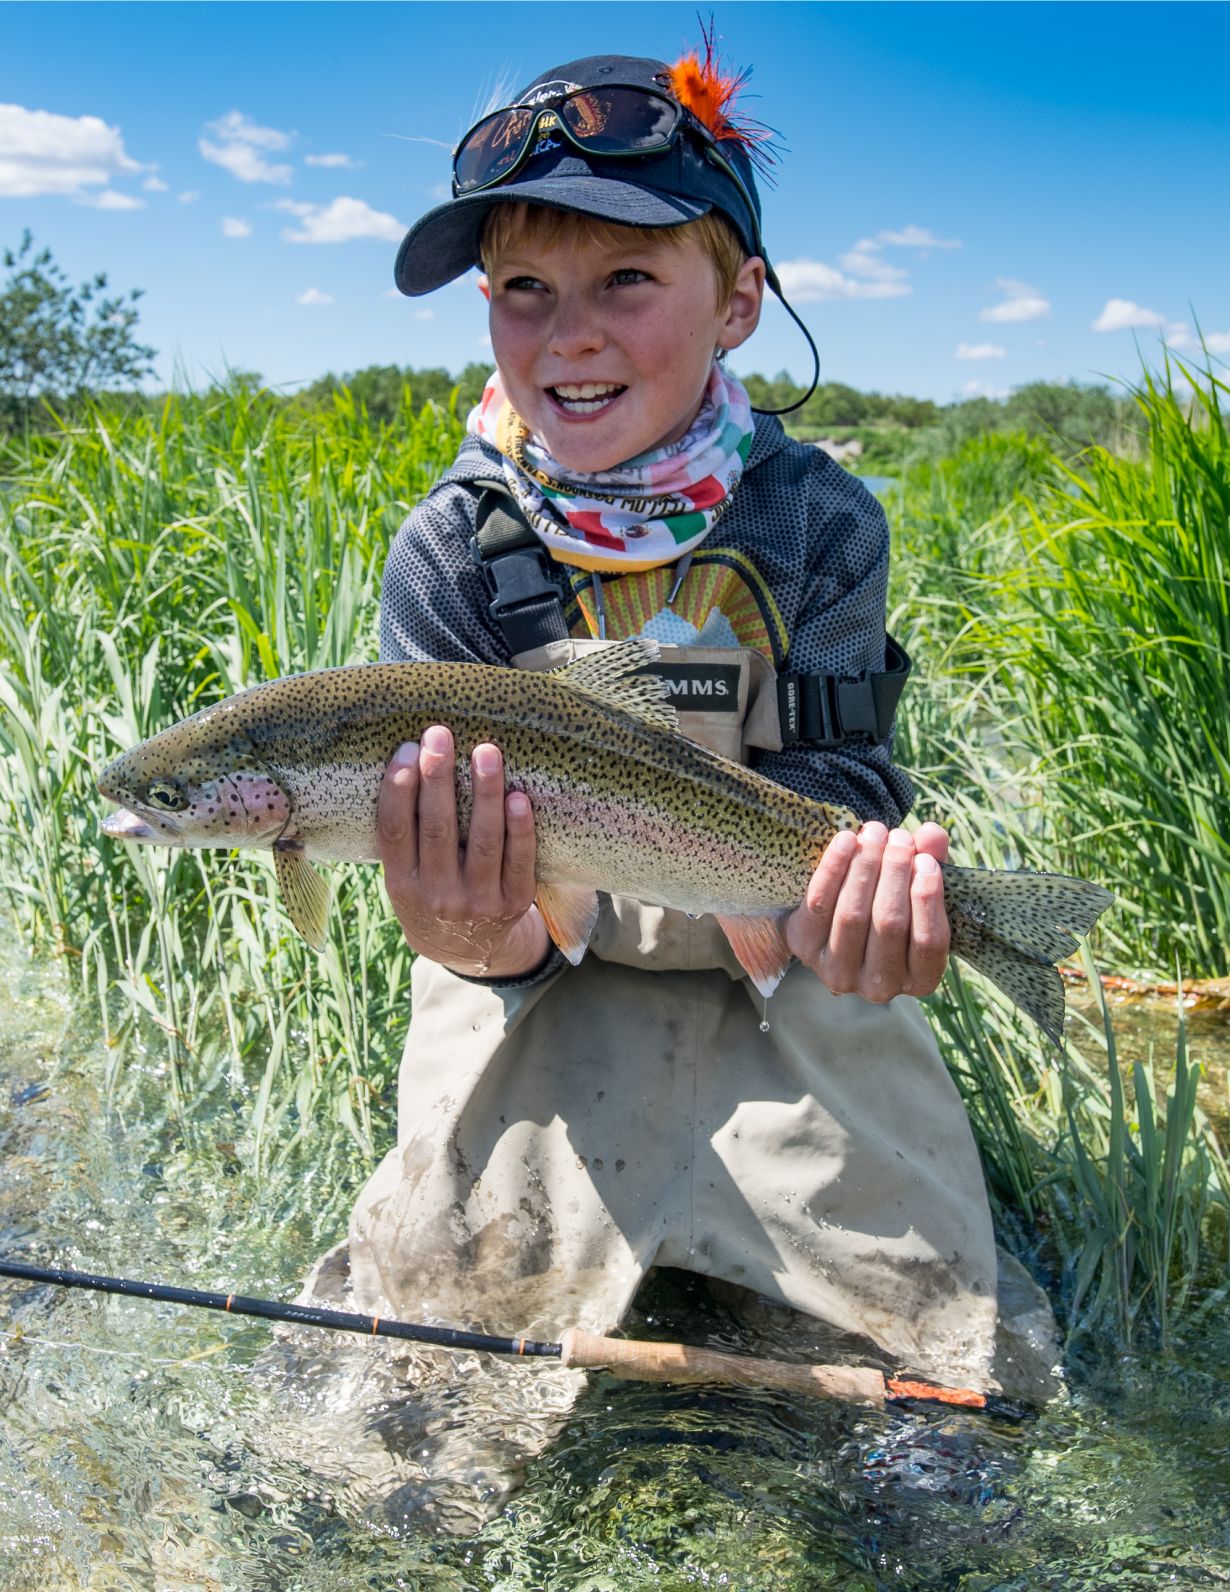  Fly Fishing For Kids